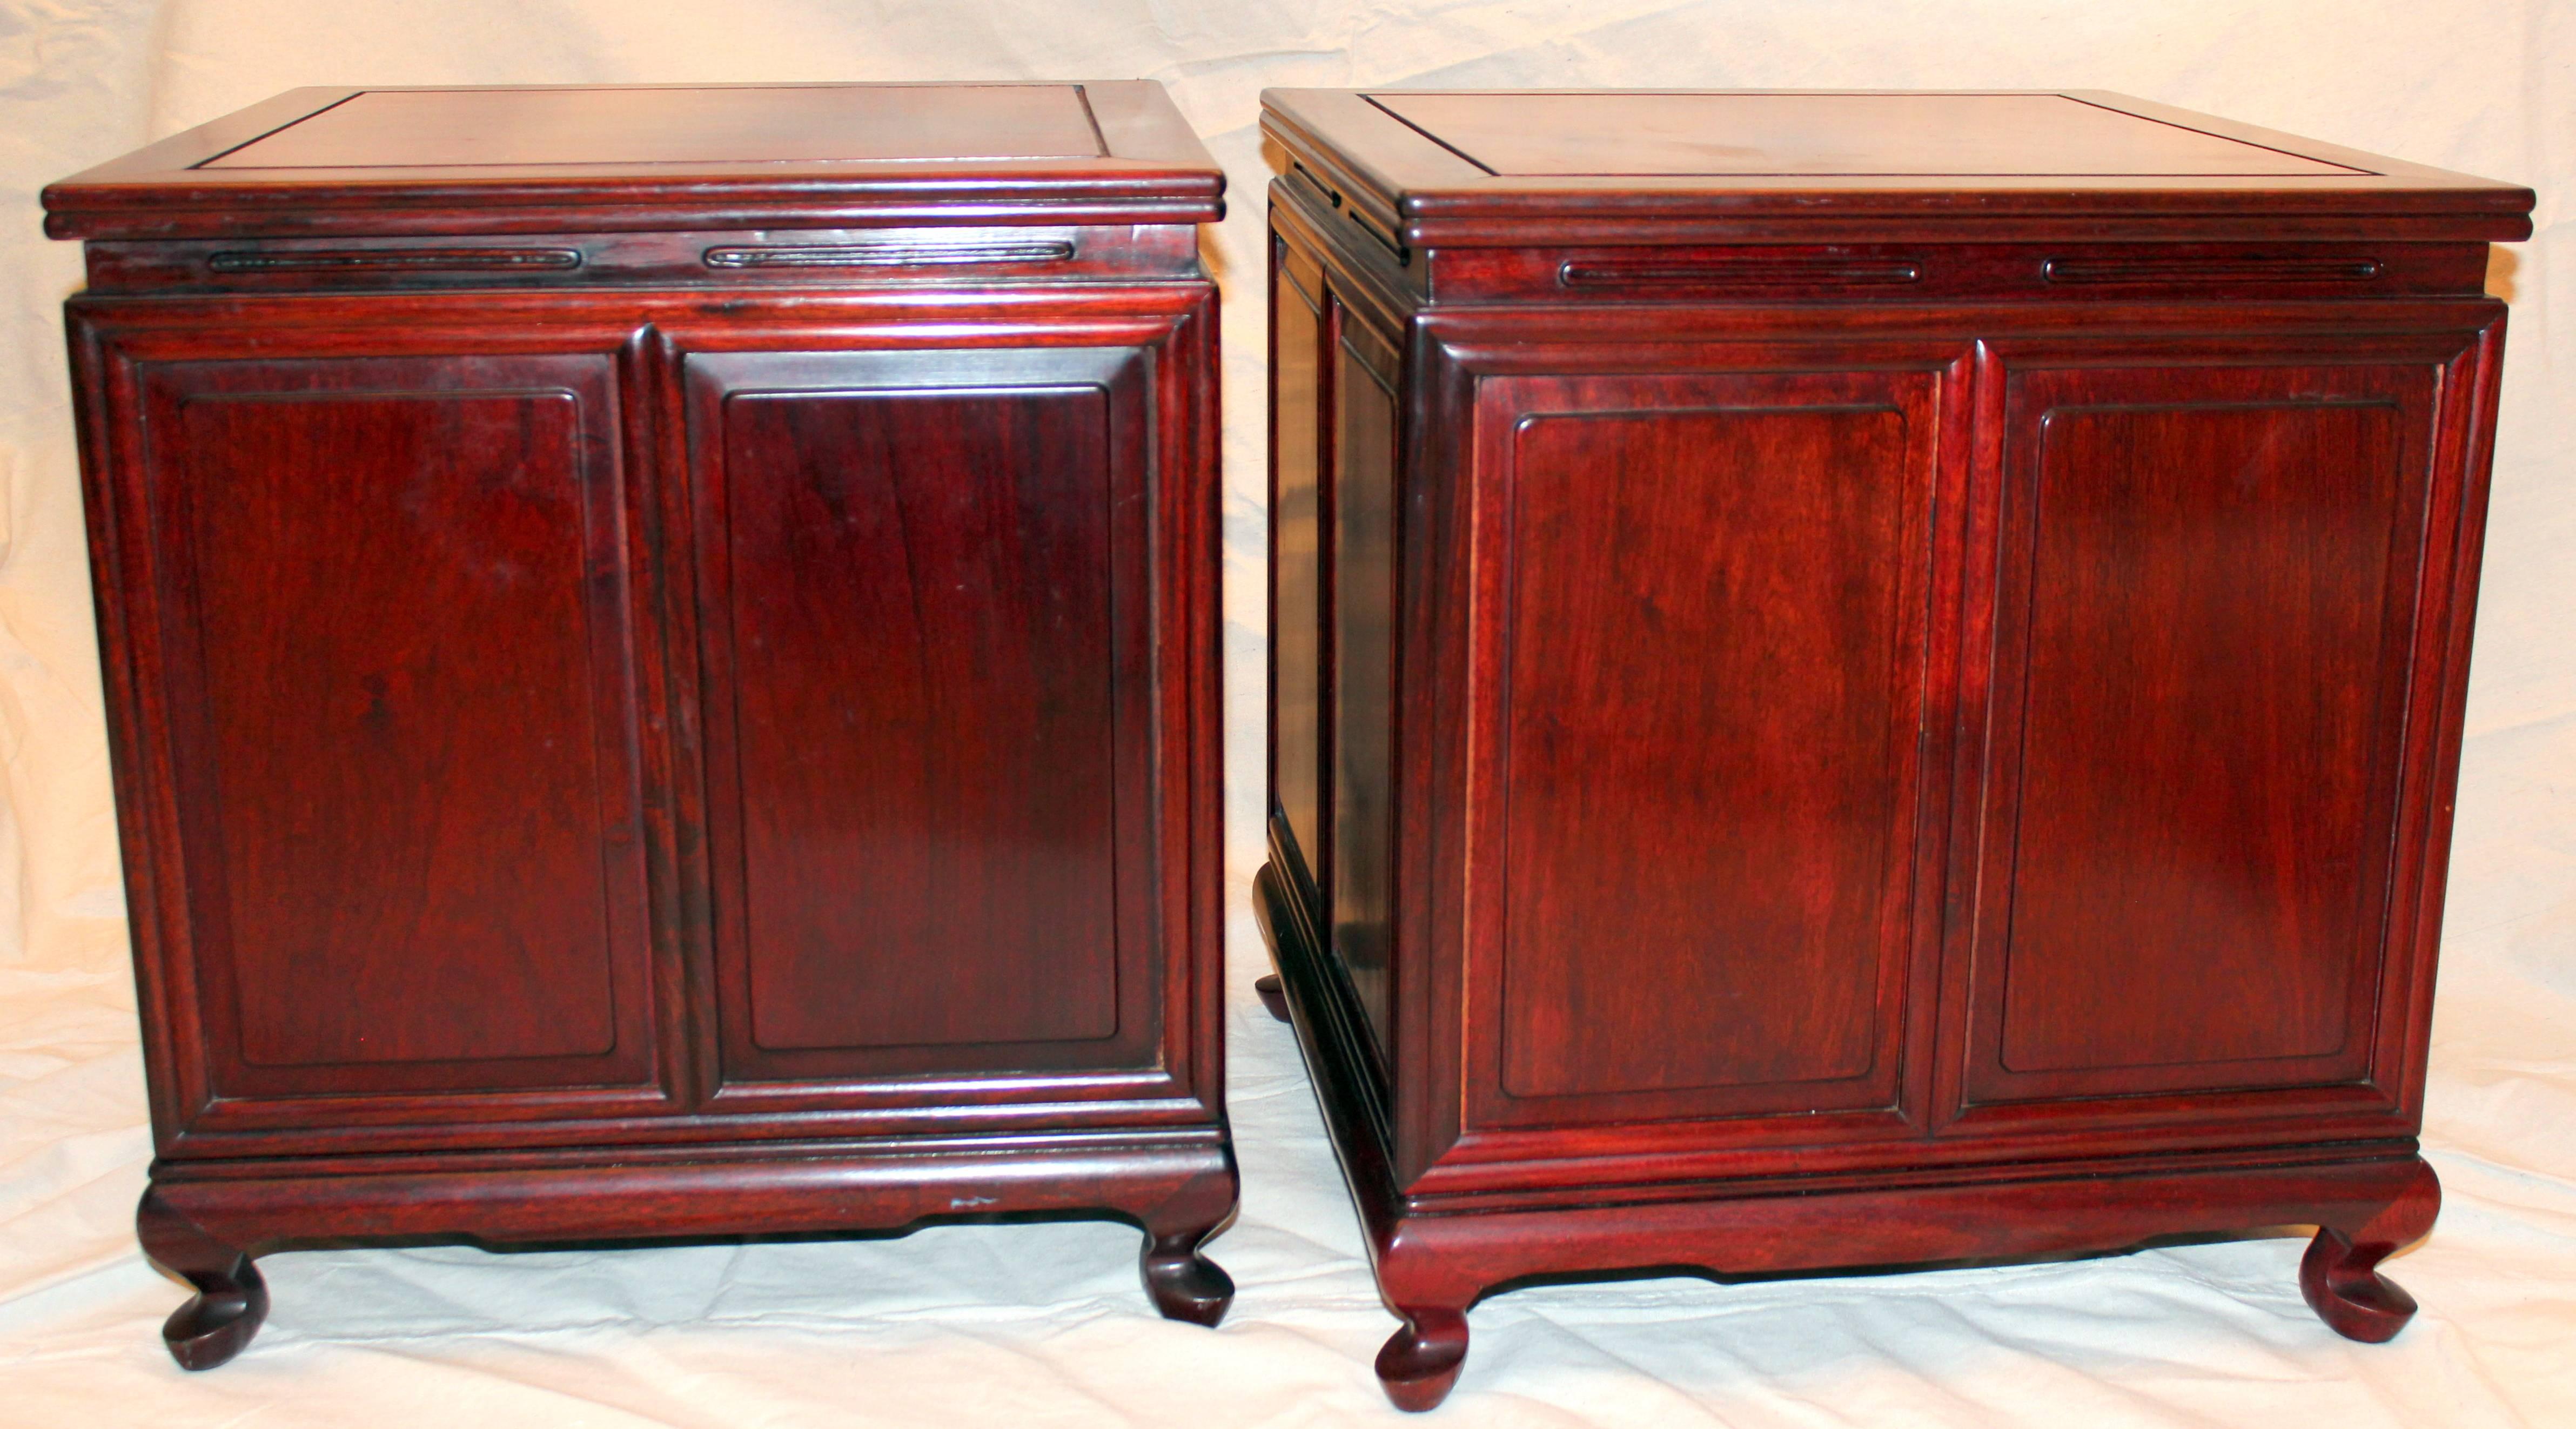 Beautifully made pair of vintage Chinese rosewood side tables, circa 1970s. Each with four storage drawers concealed behind a vertical tambor door. With traditional Chinese construction and Western style Queen Ann feet was probably made for export